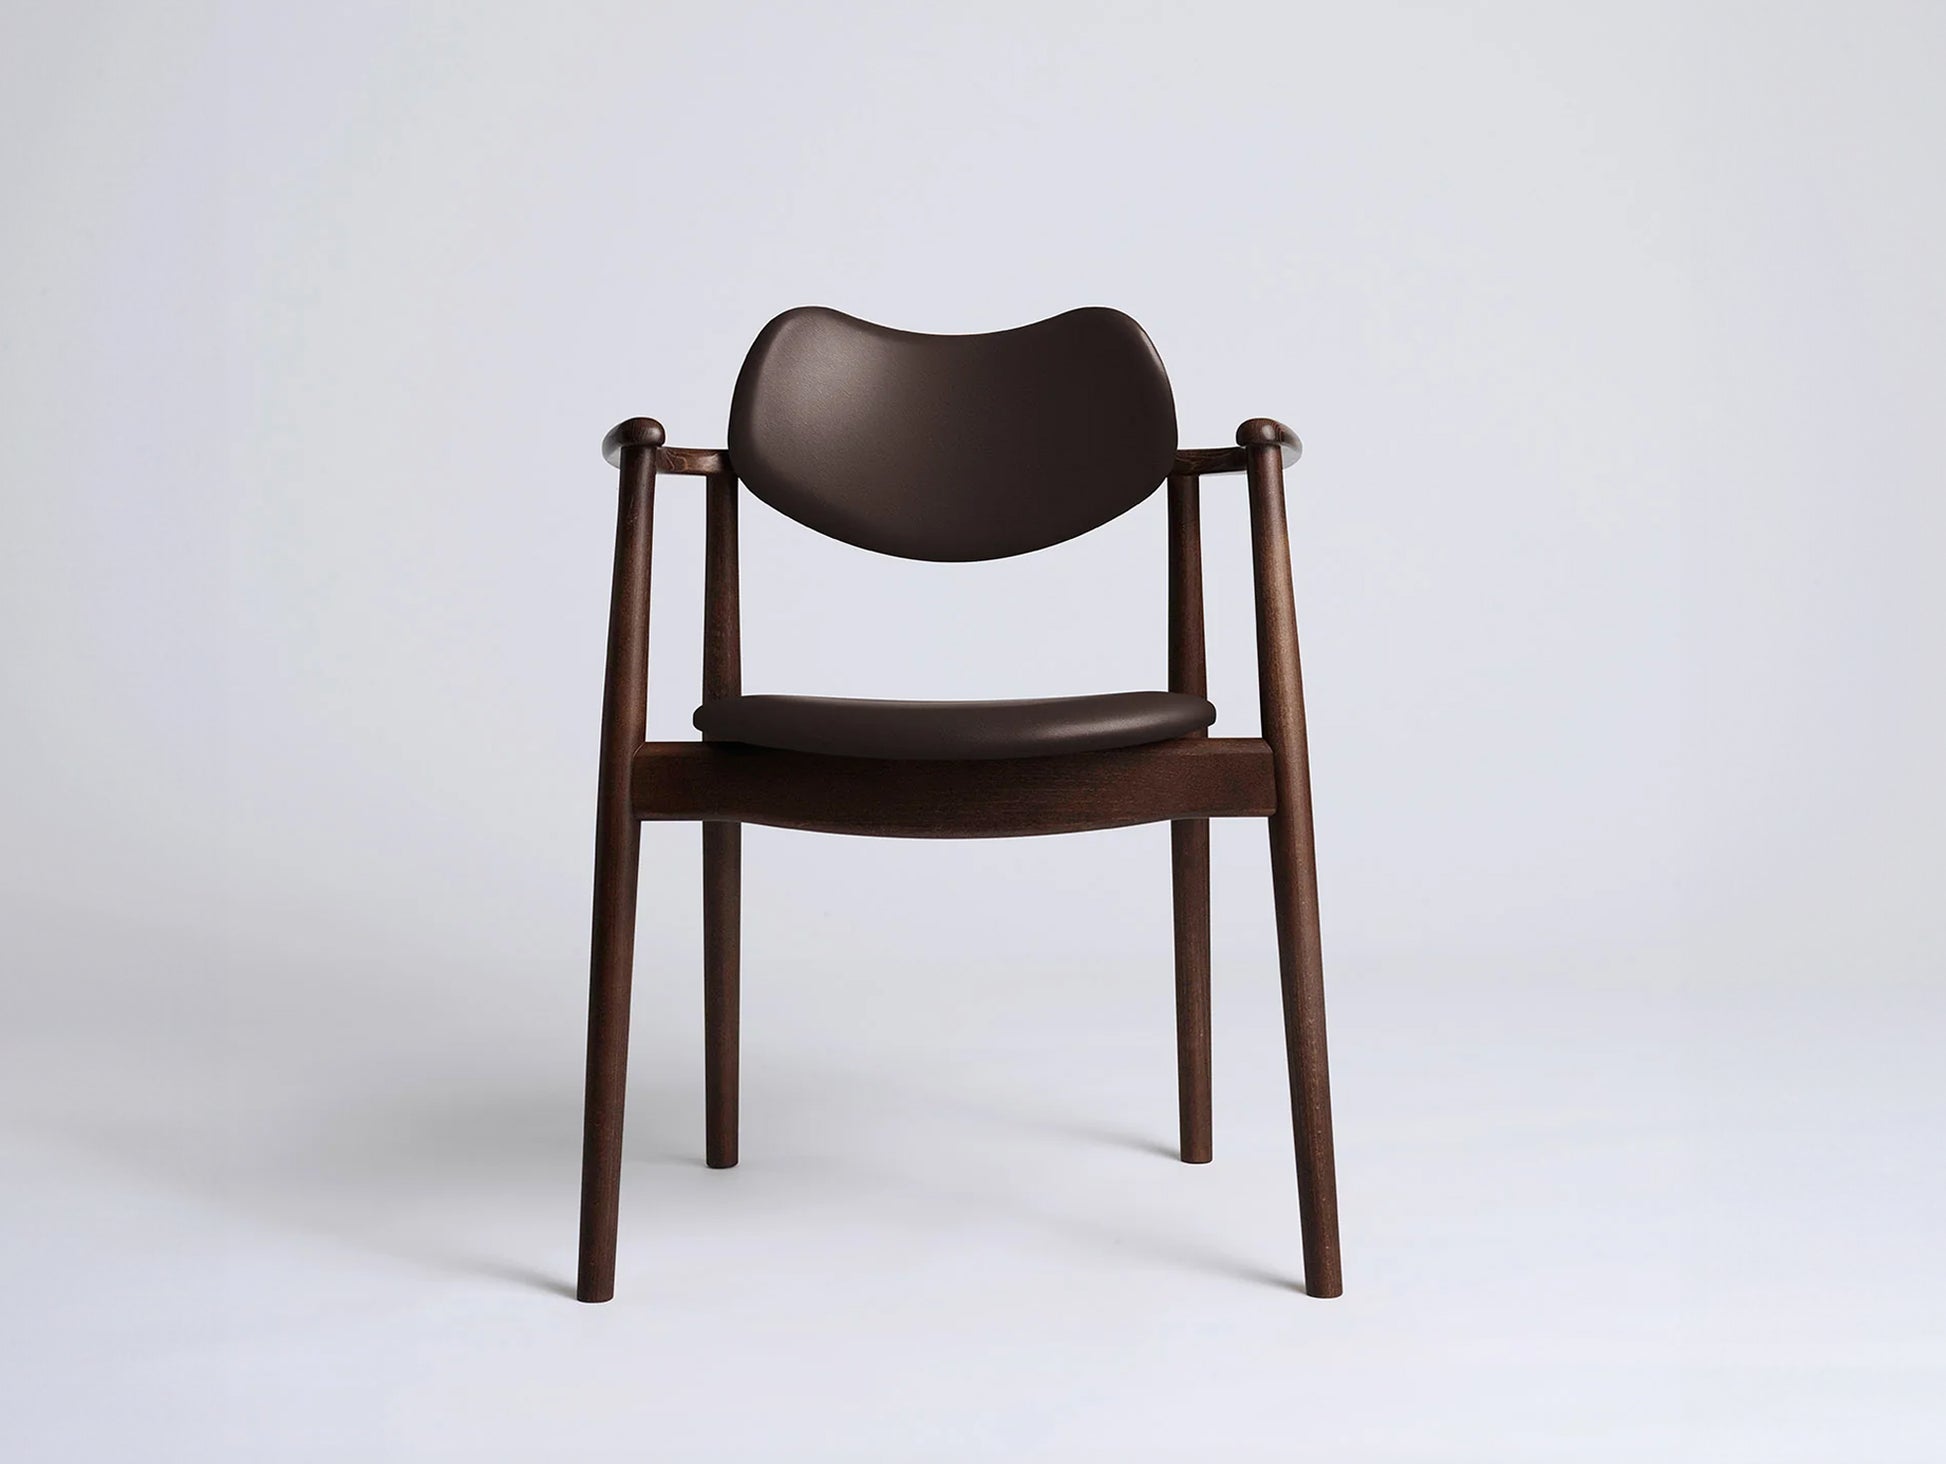 Regatta Chair Seat and Back Upholstered by Ro Collection - Walnut Stained Beech / Exclusive Rio Chocolate Brown Leather